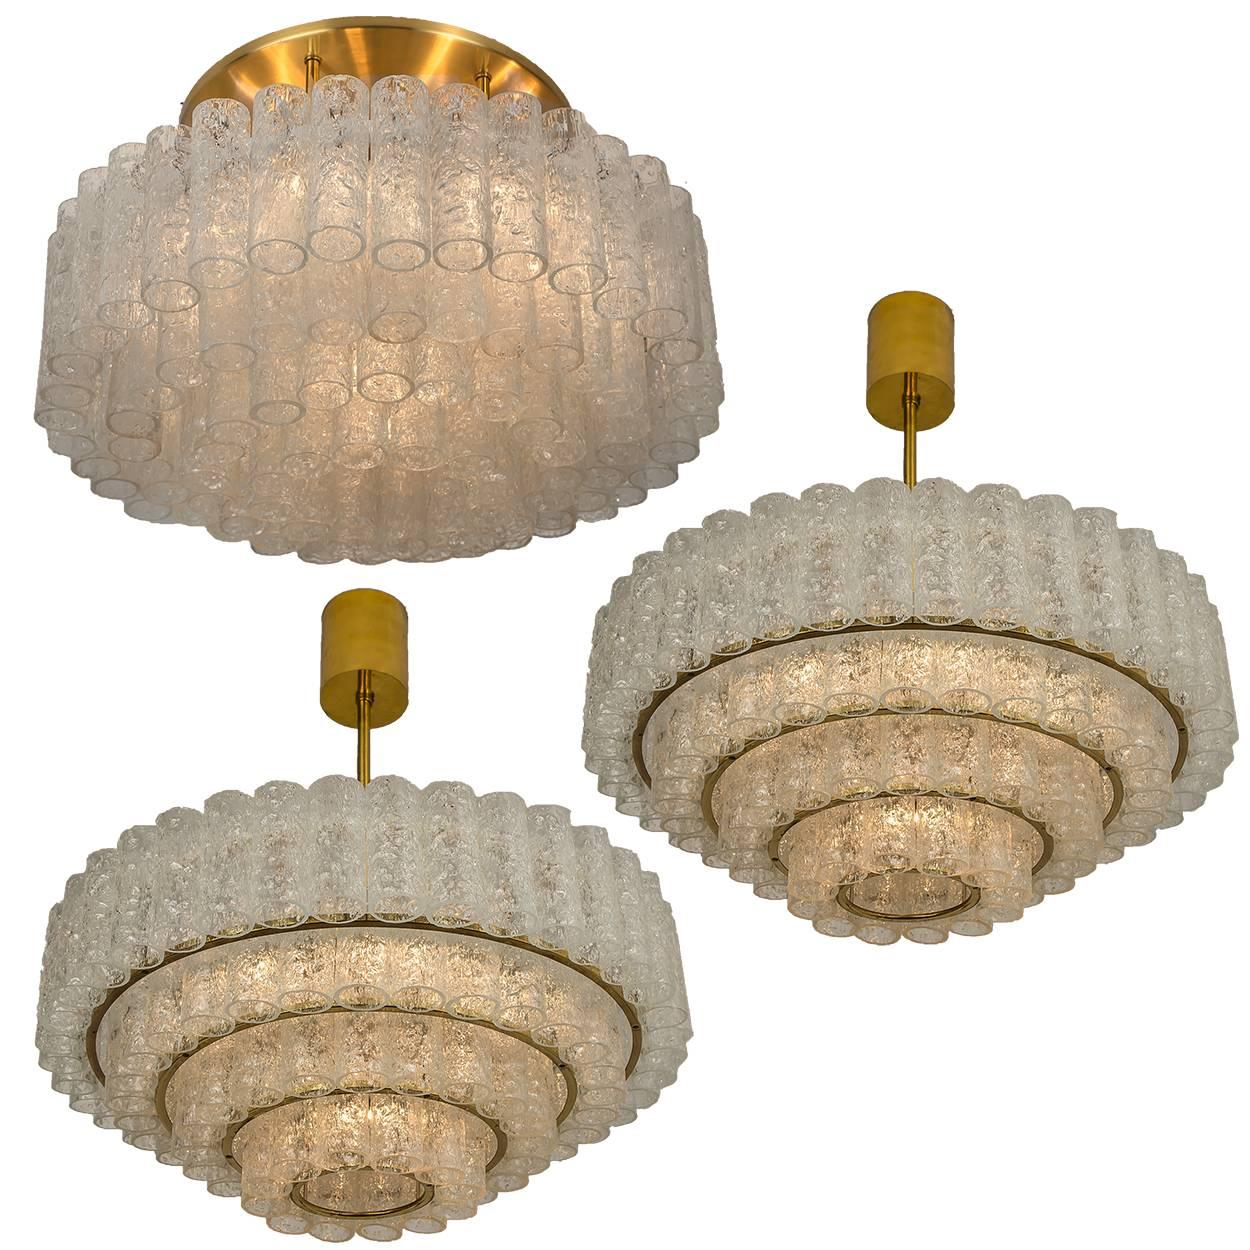 Set of Three Large Glass Brass Light Fixtures by Doria, Germany, 1969 For Sale 13